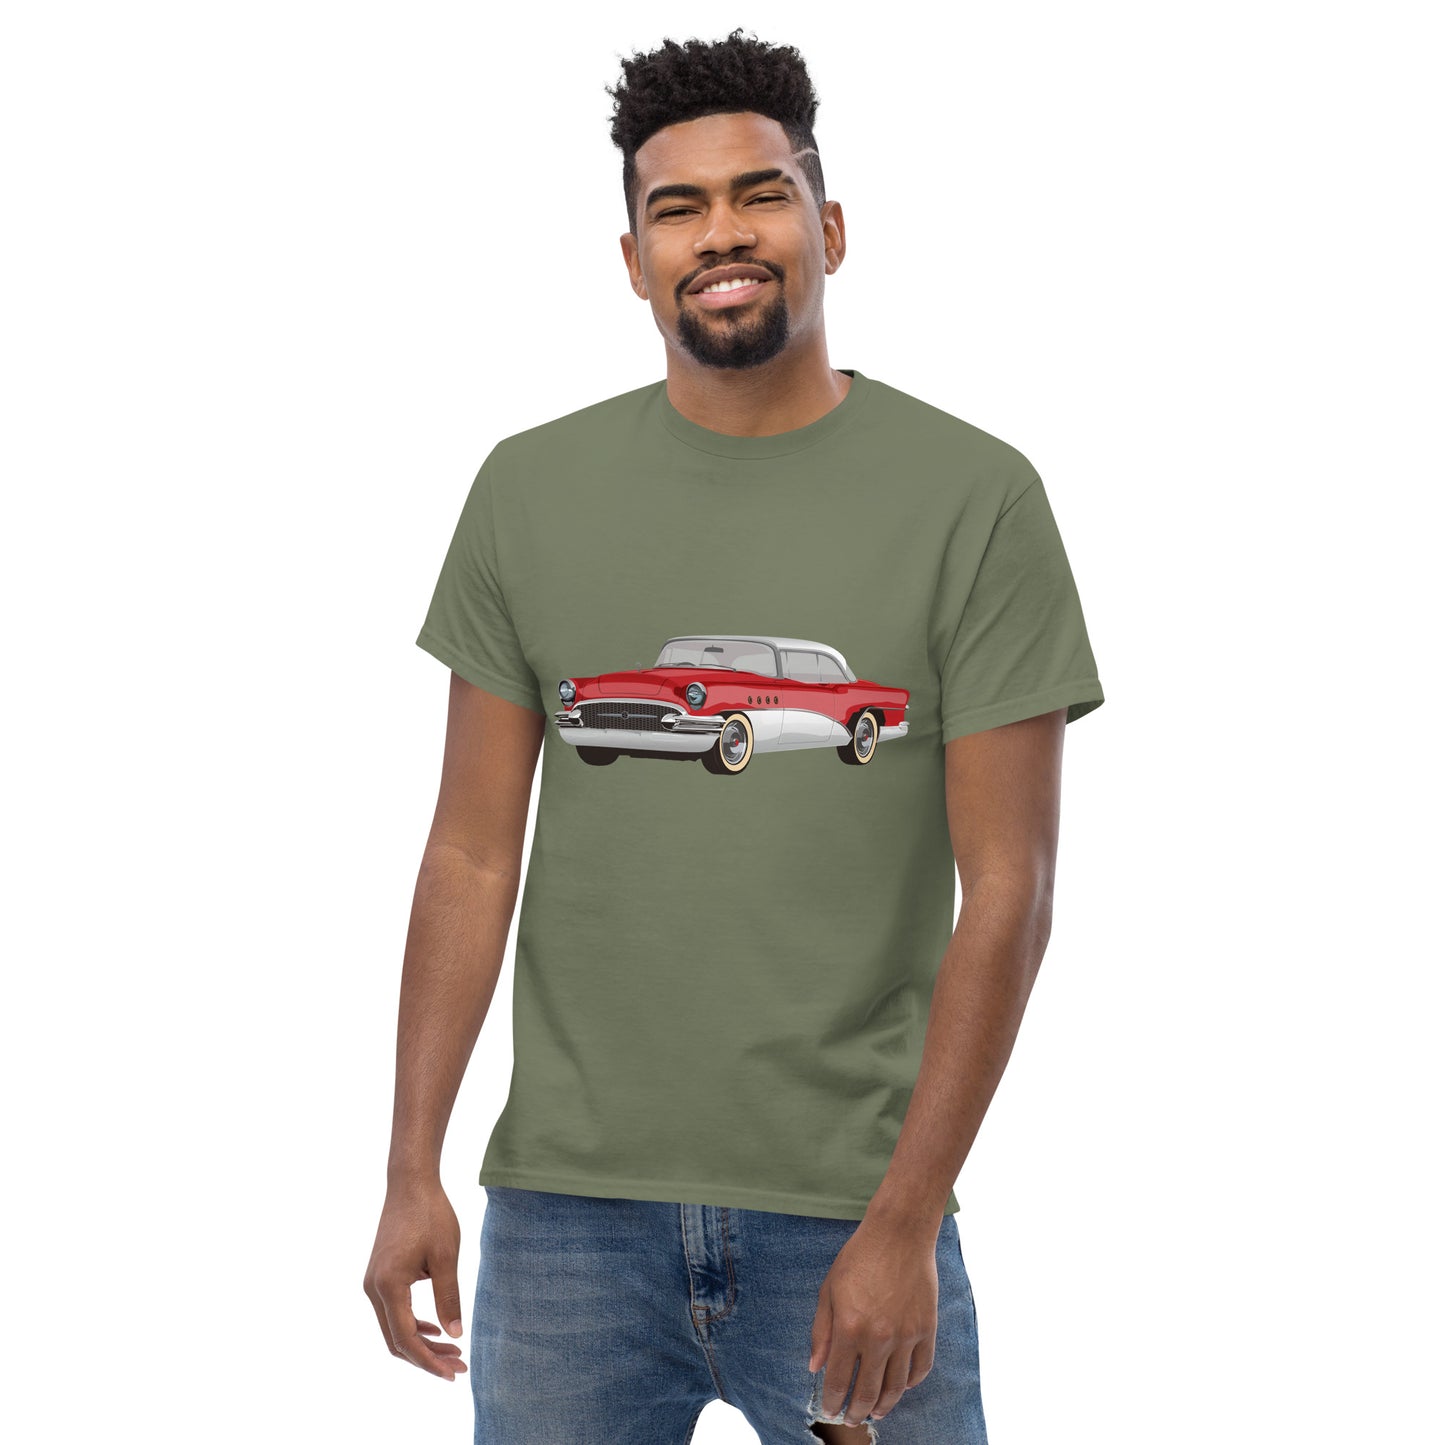 Men with military green t-shirt with red Chevrolet 